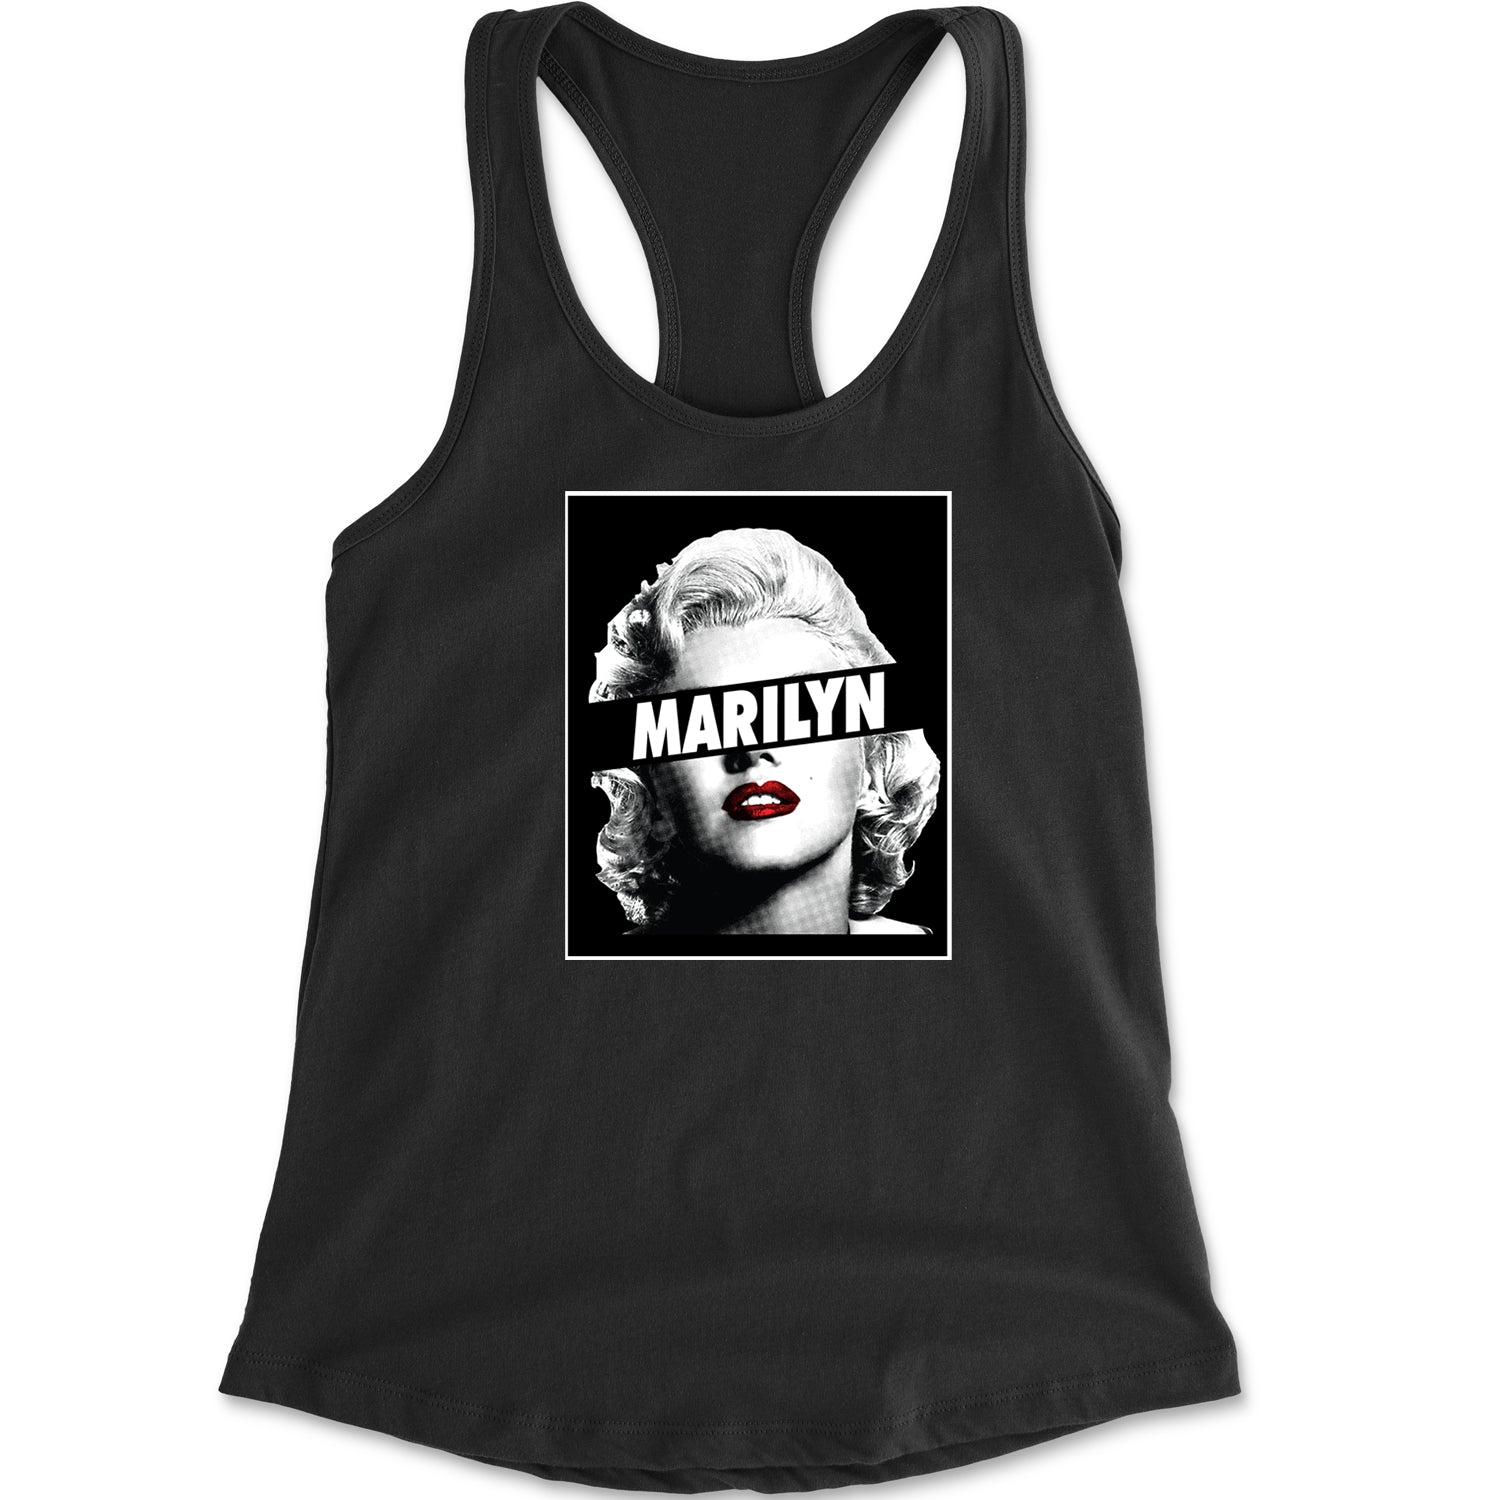 Marilyn Monroe Censored Racerback Tank Top for Women american, icon, marilyn, monroe by Expression Tees